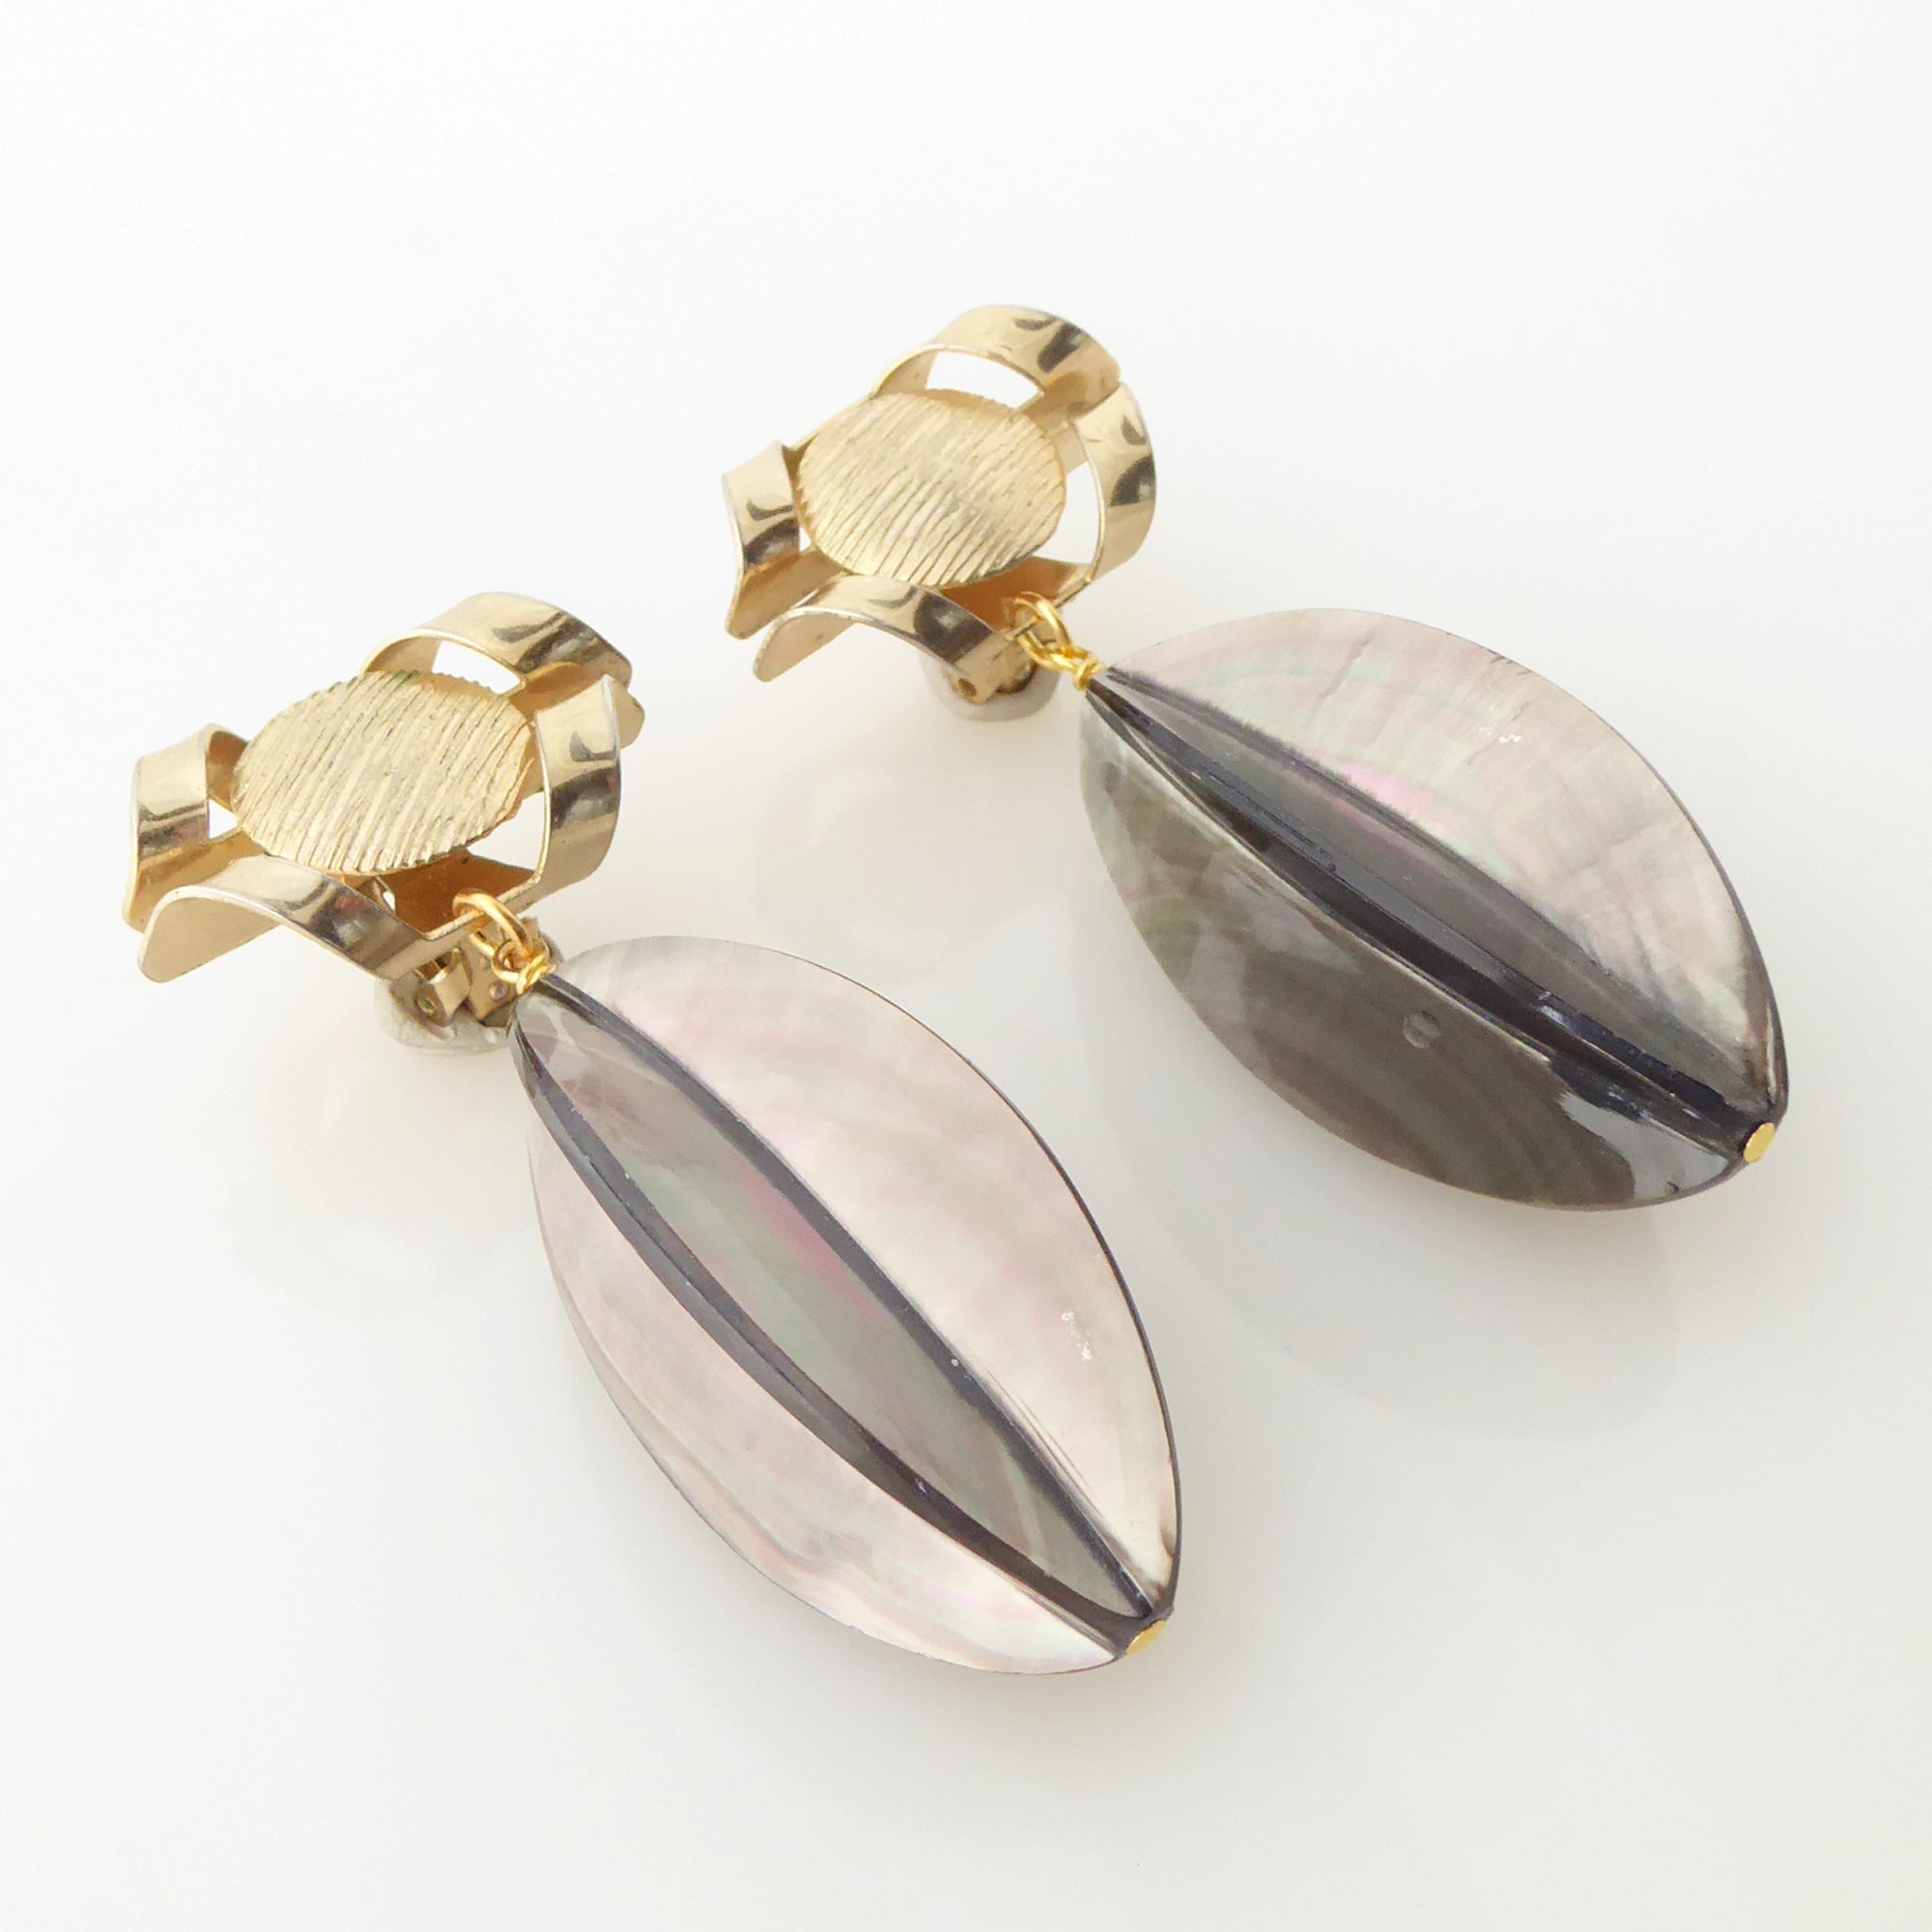  Black lip oyster shell earrings by Jenny Dayco 2